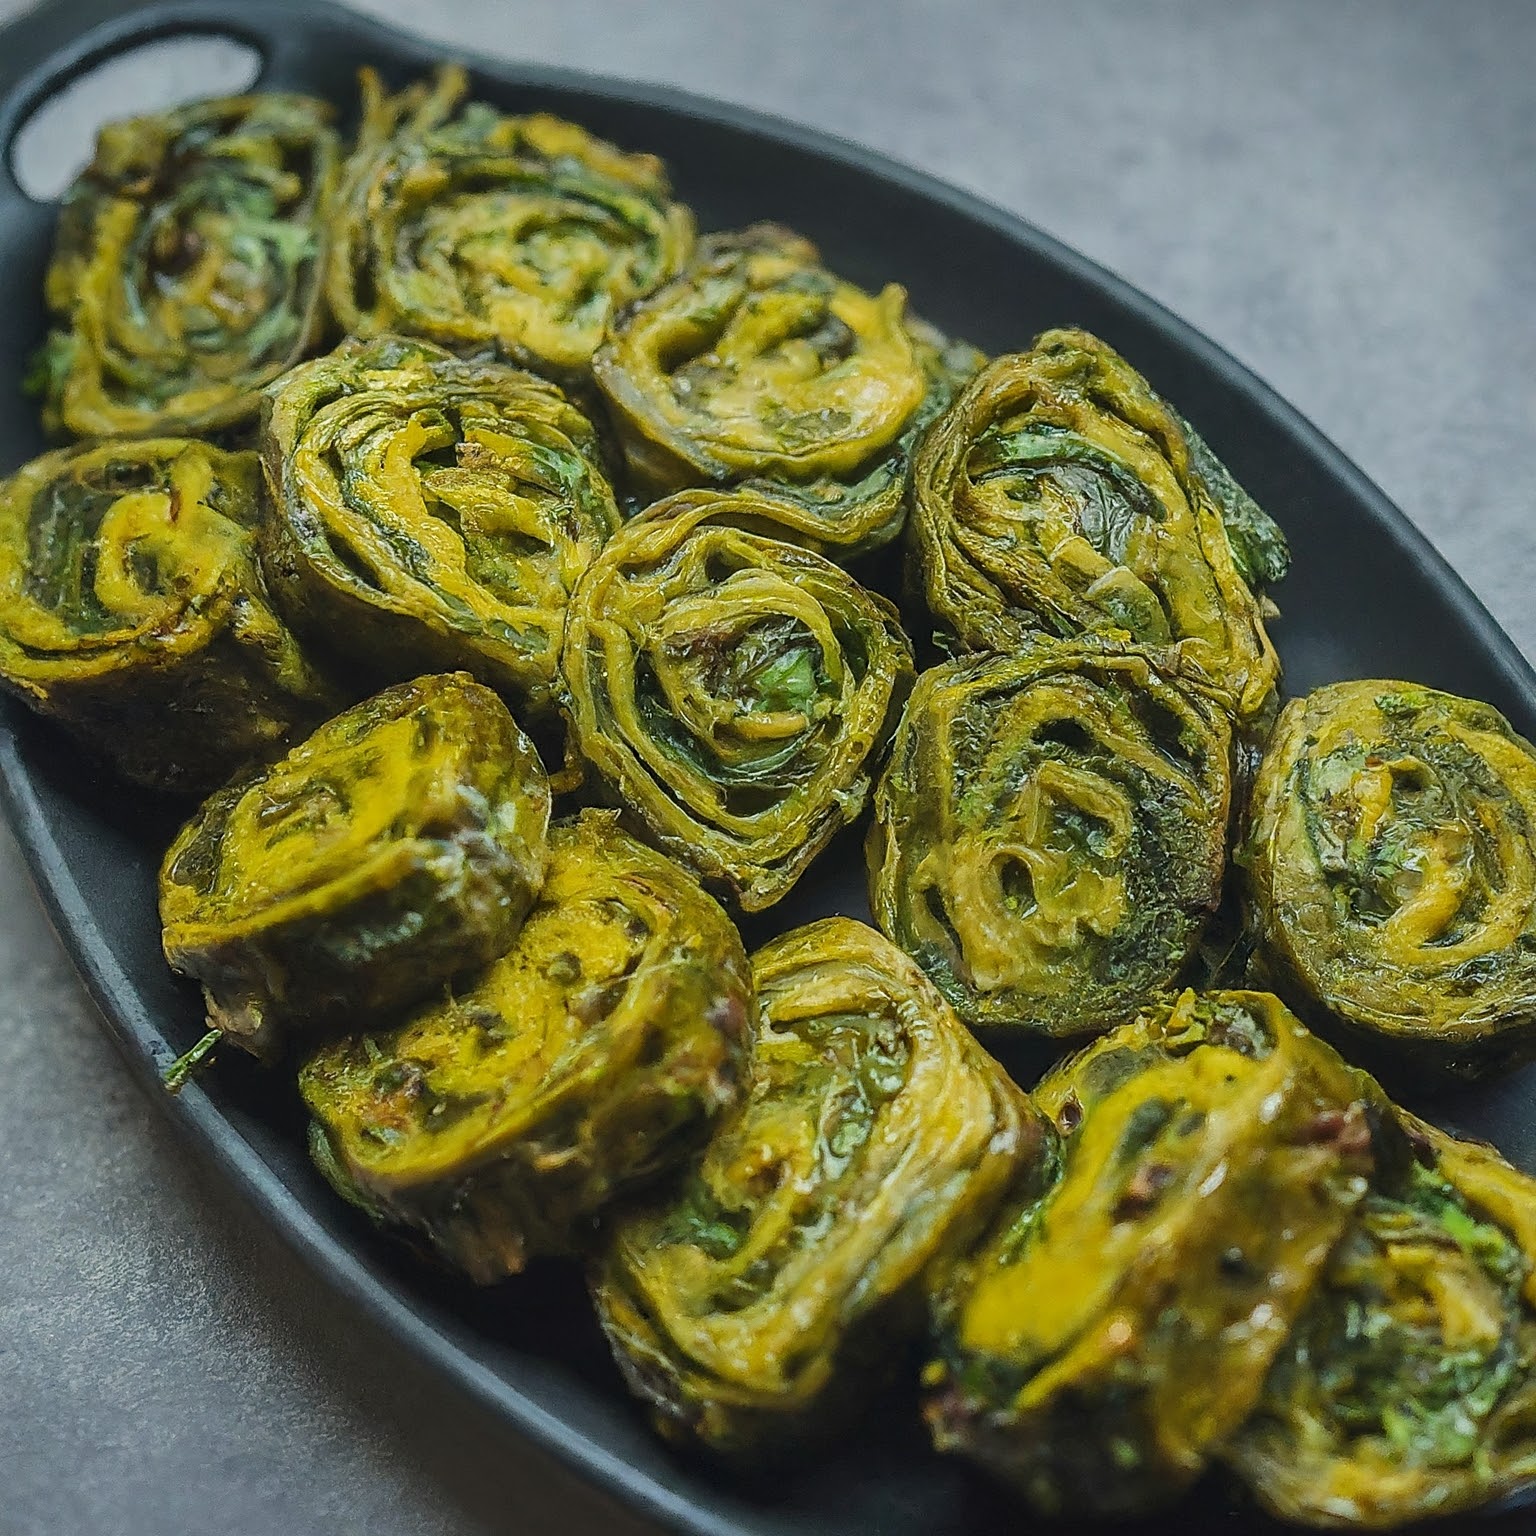 A close-up view of a plate of Patra, a green vegetarian dish with colocasia leaves and chickpea flour batter.